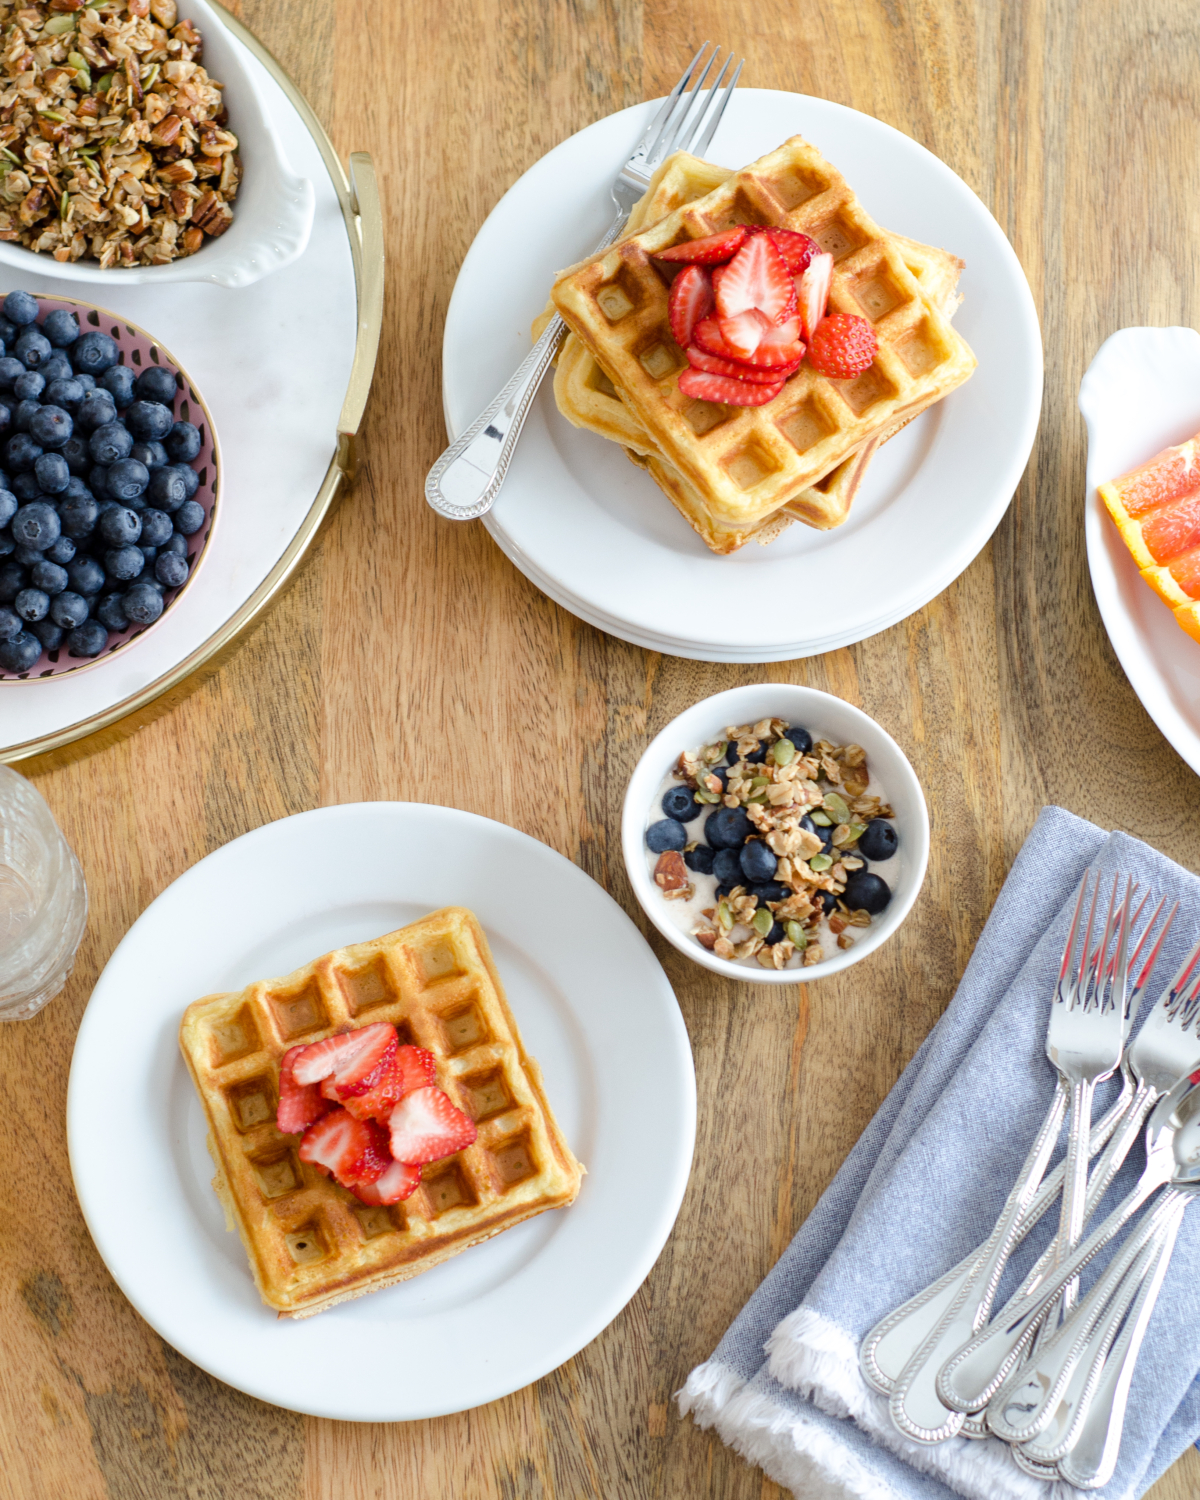 A Belgian waffle recipe so easy, so delicious, you will never need another waffle recipe in your repertoire. Ready start to finish in fifteen minutes!